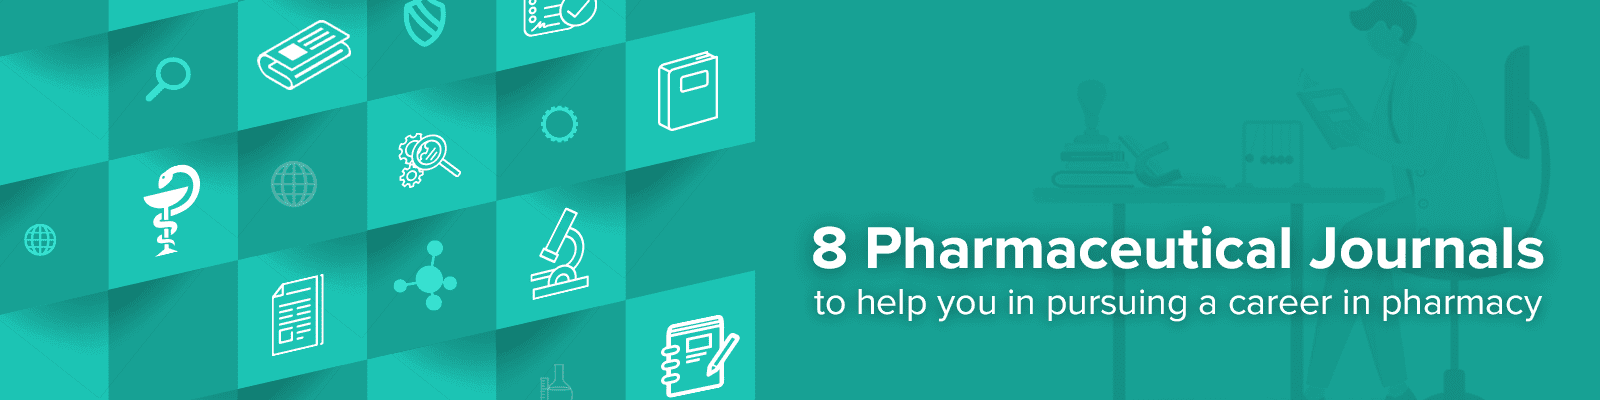 8 Pharmaceutical Journals to help you in pursuing a career in pharmacy